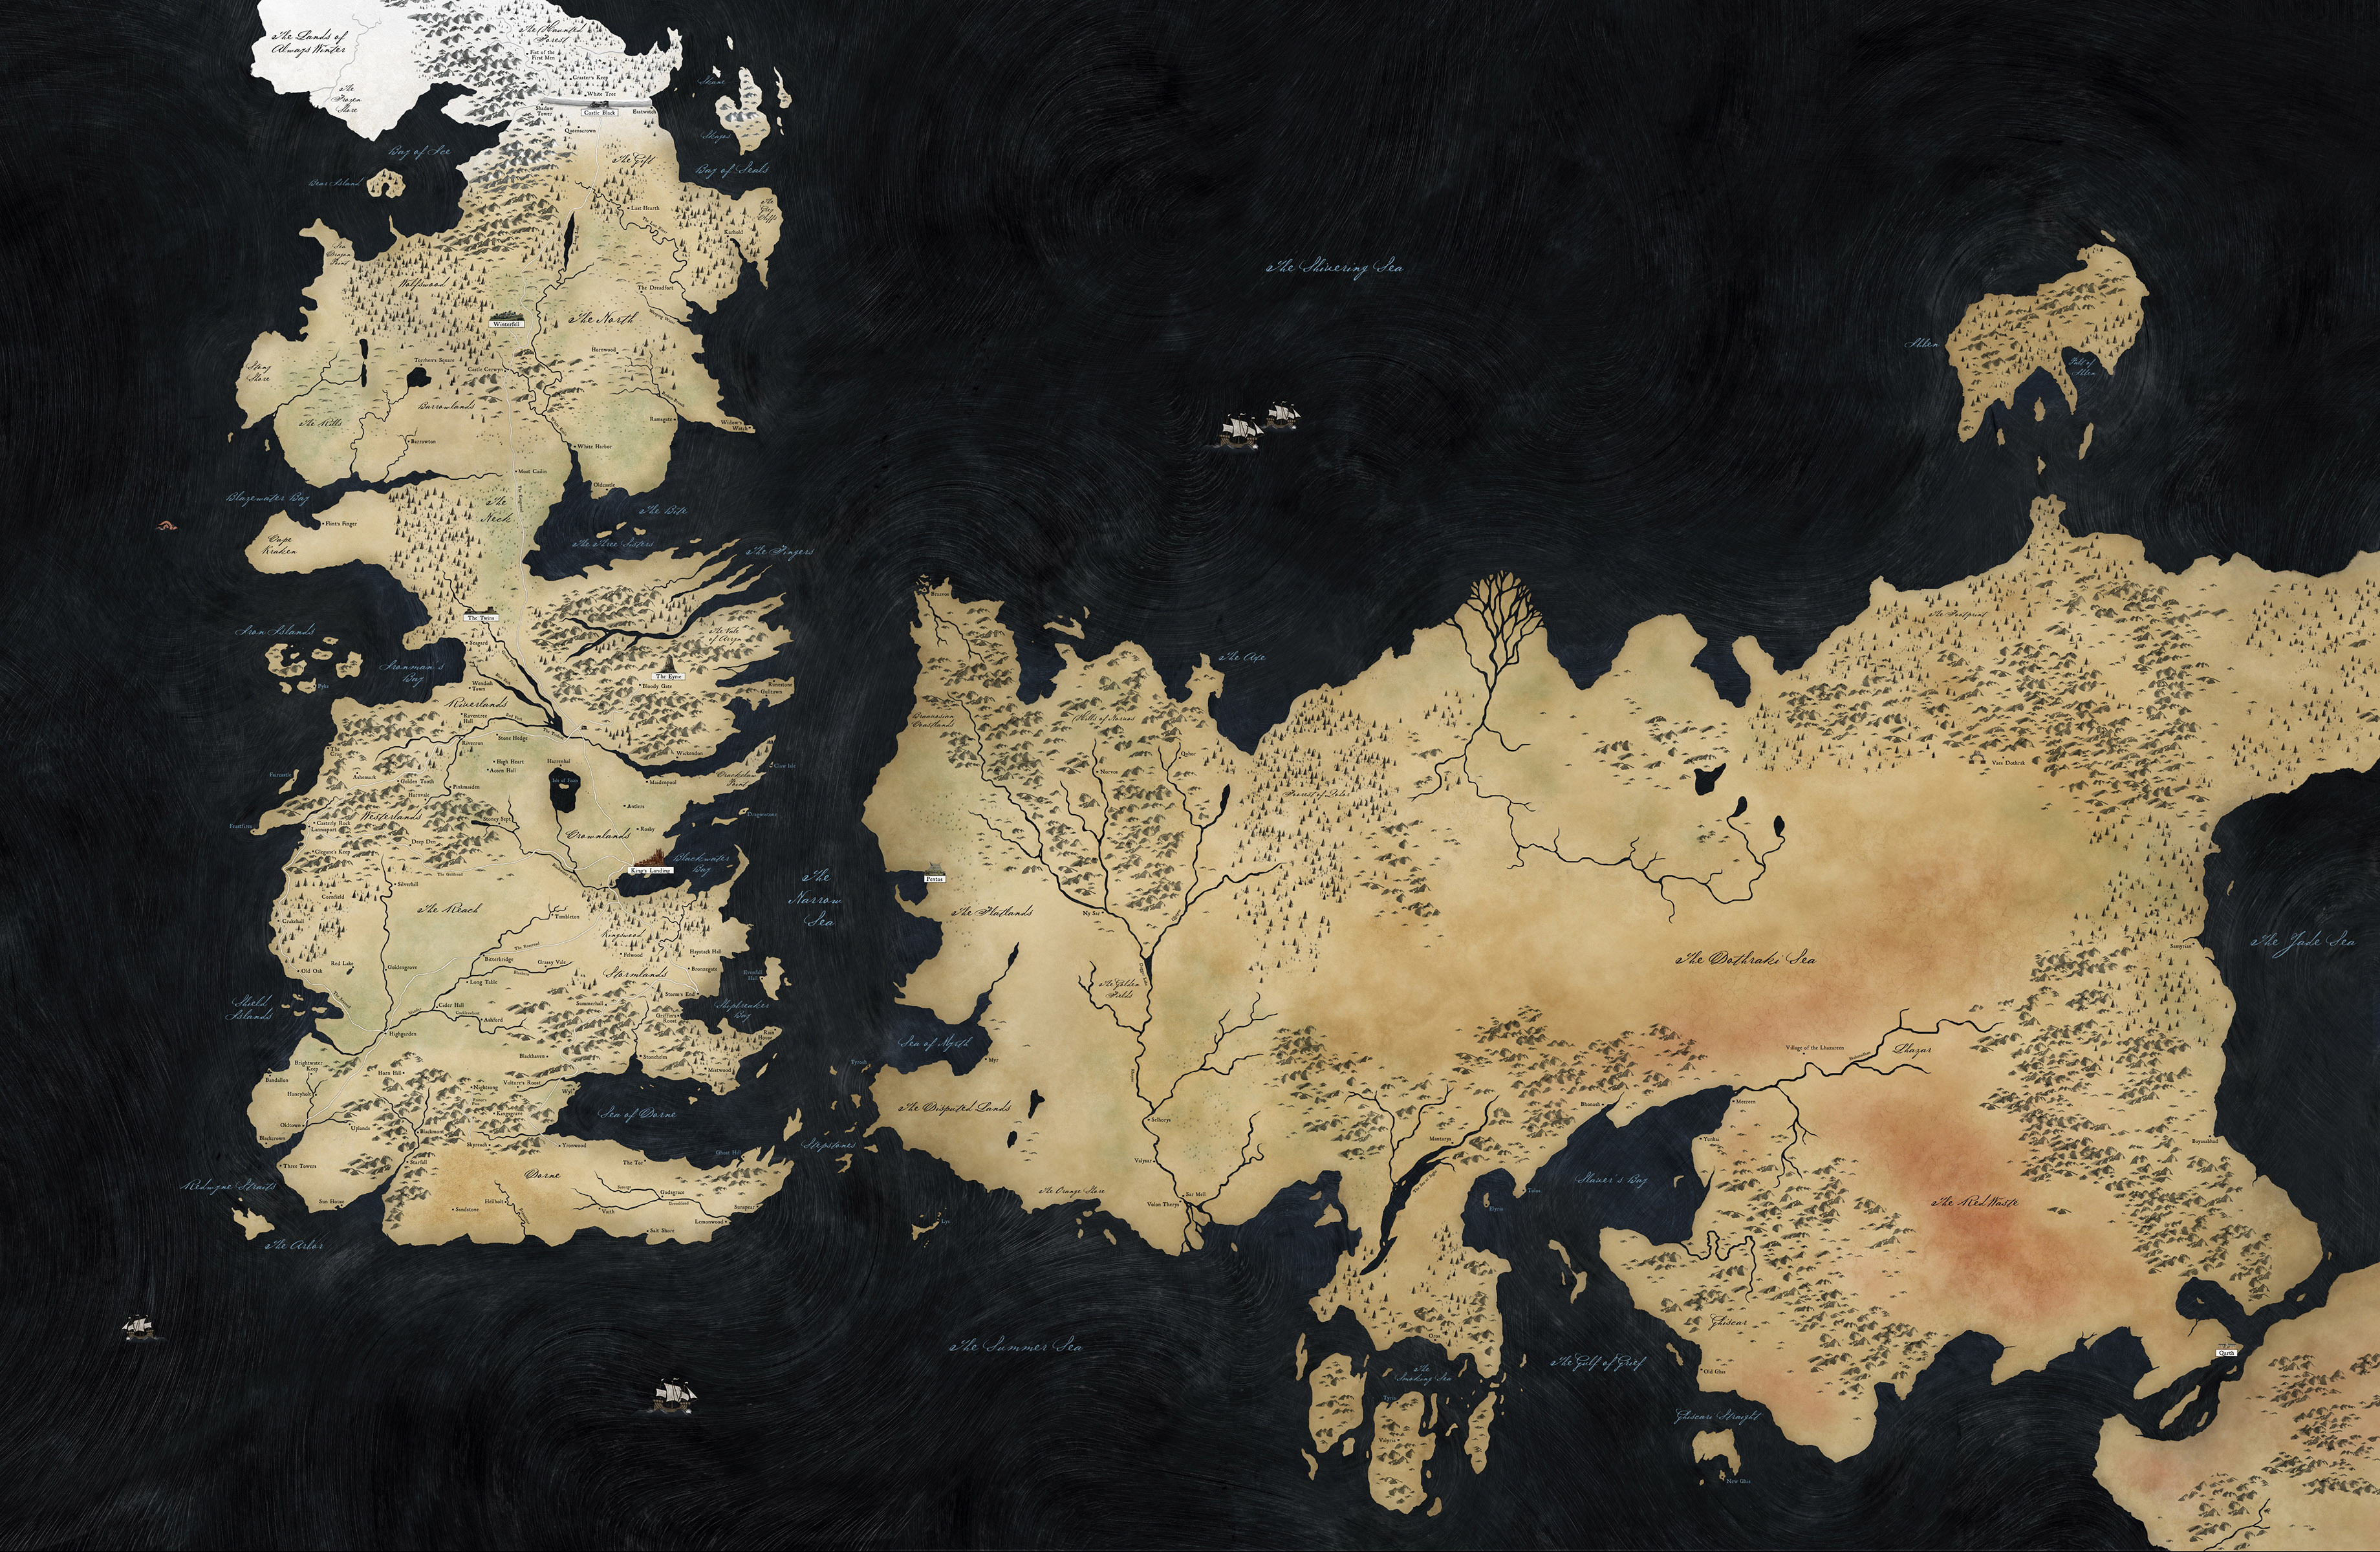 Game Of Thrones Map Westeros And Essos Wallpaper